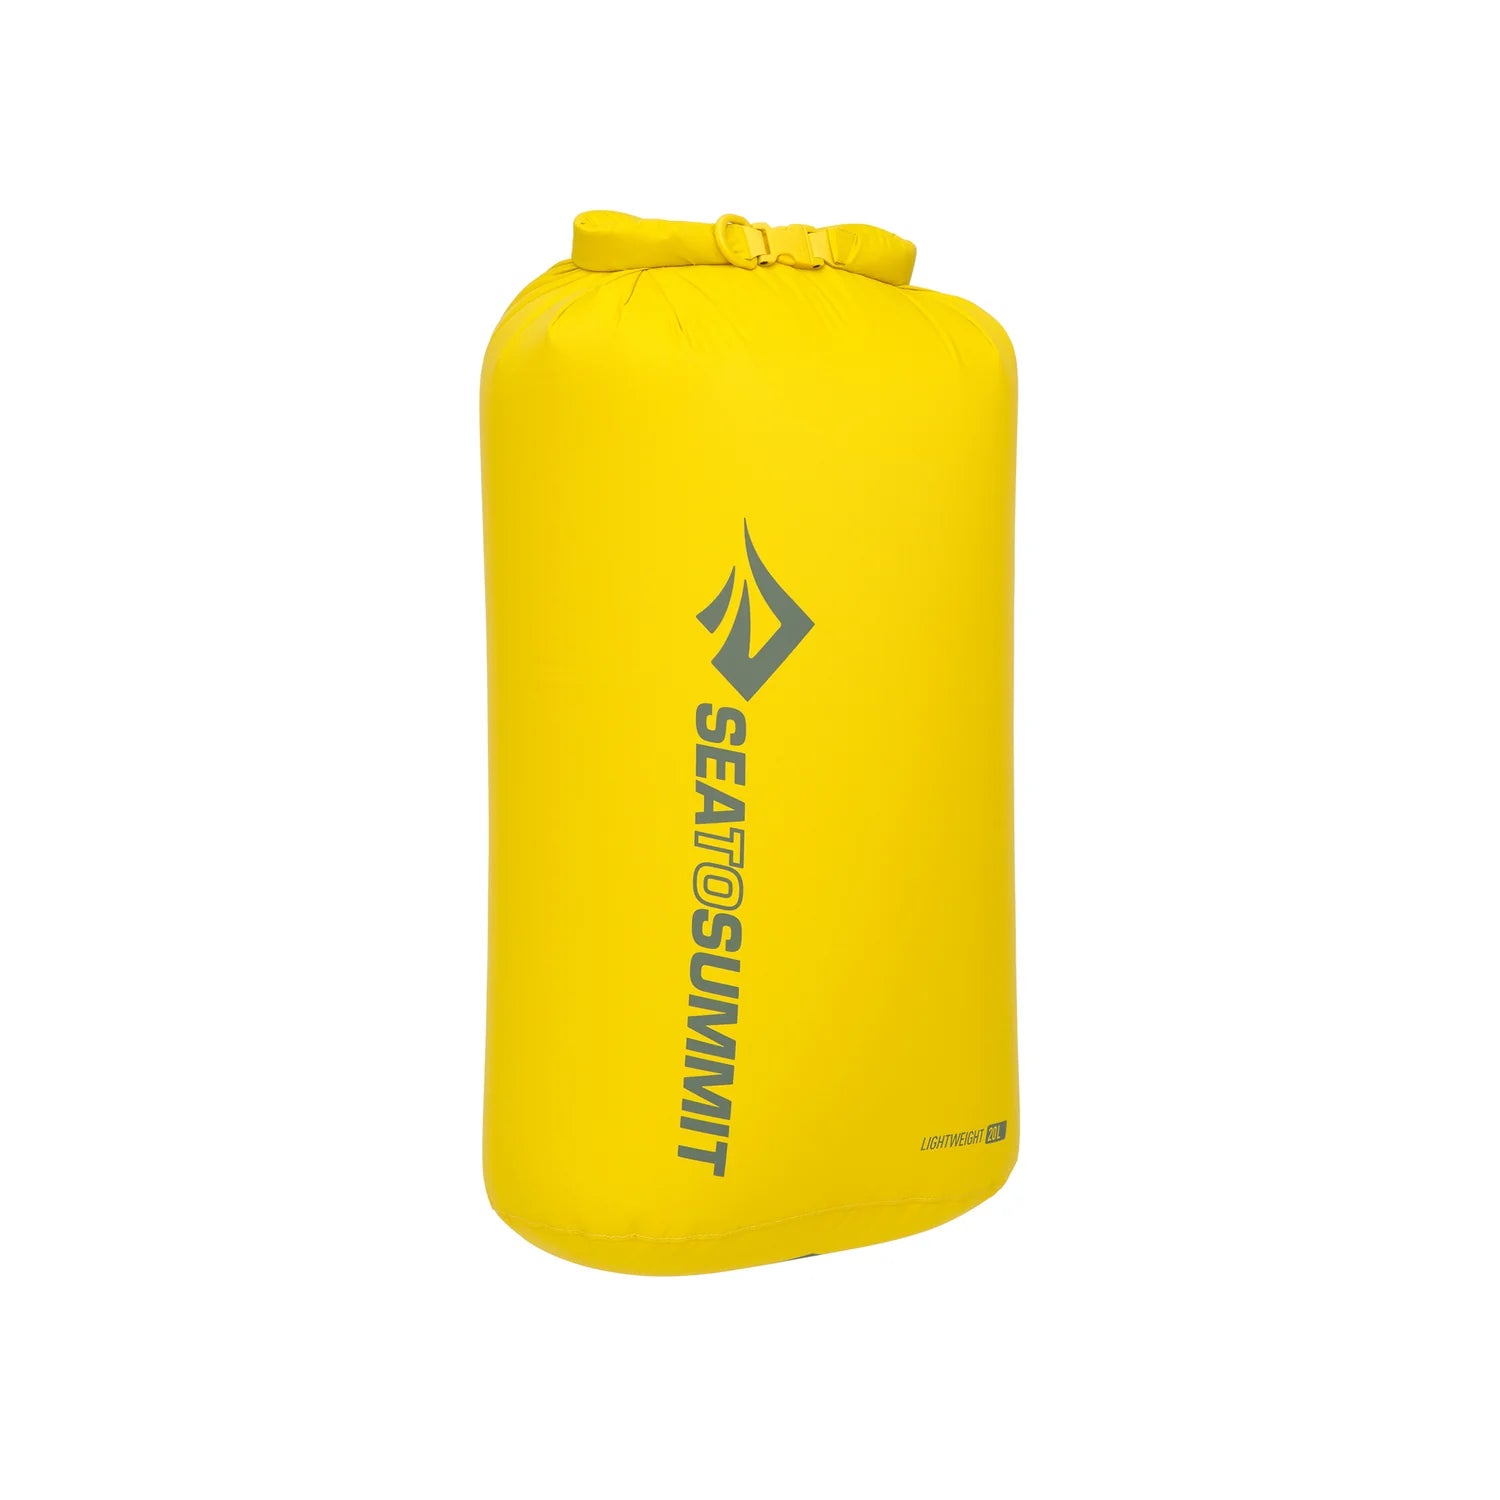 Sea to Summit - Lightweight Dry Bag 20L - Sulpher-1